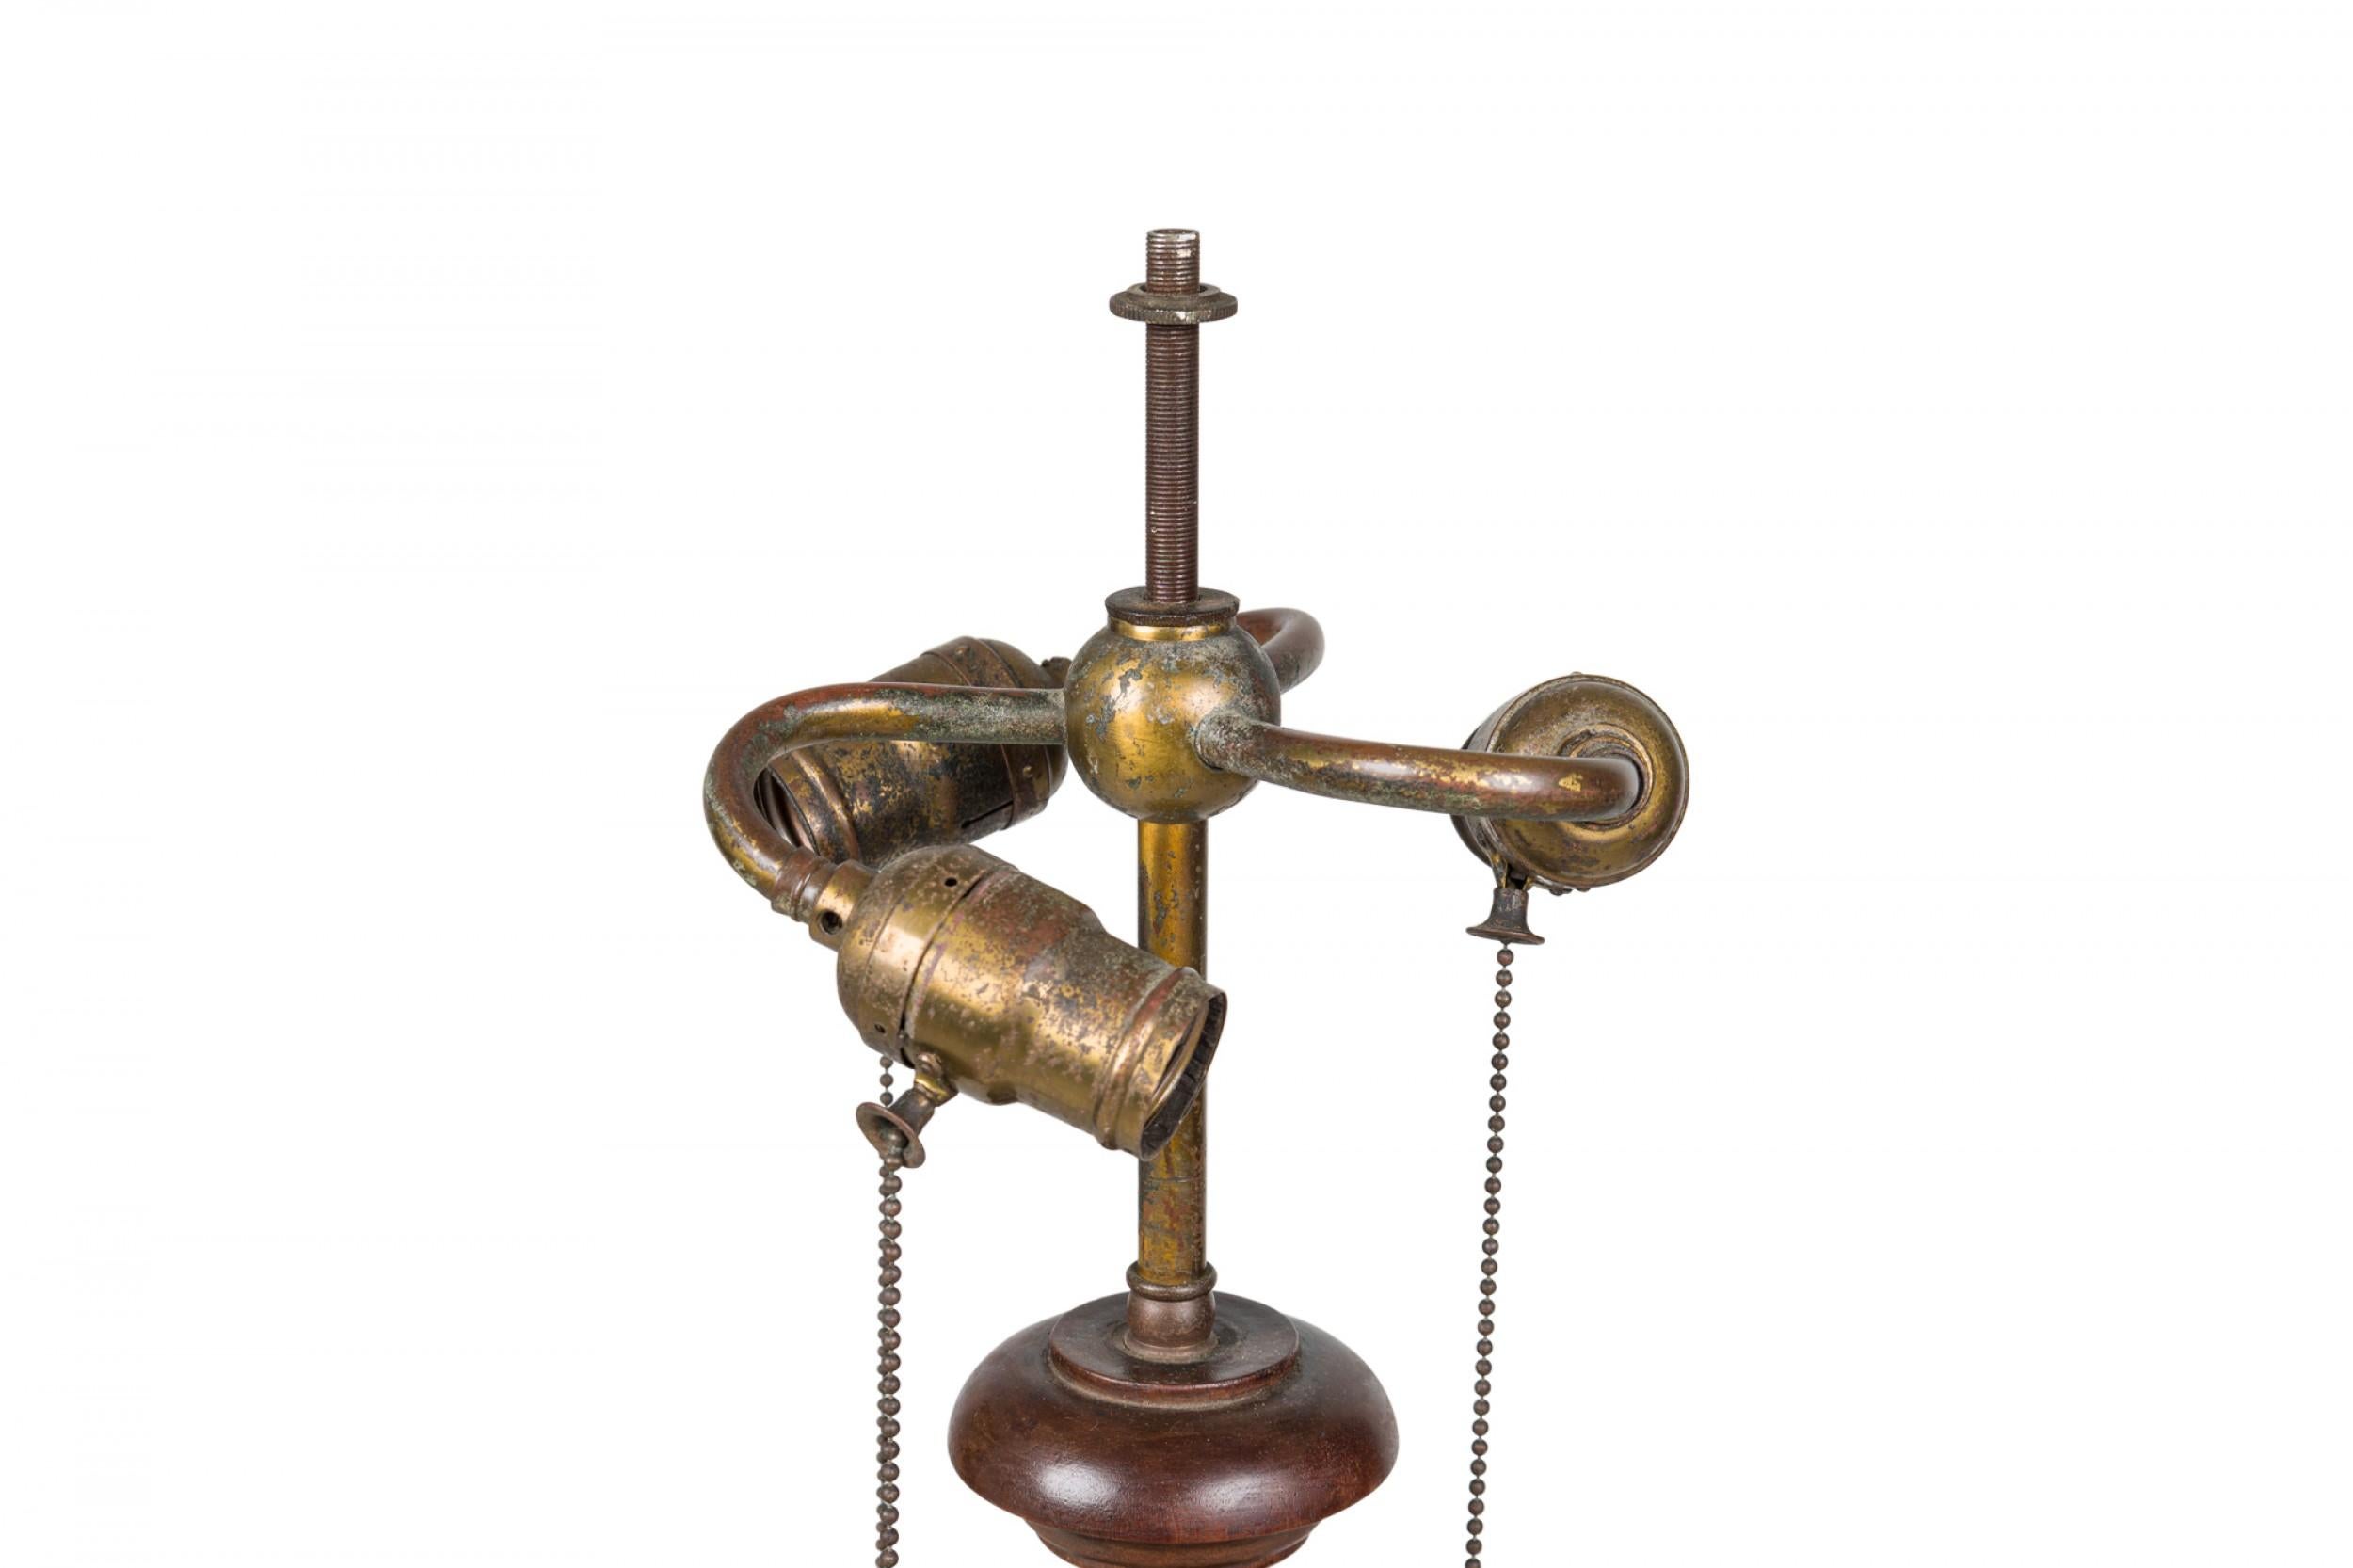 English Victorian elaborately carved mahogany floor lamp mounted with three brass electrified sockets and threaded finial post, with an urn-form upper section that tapers to a fluted column with turned detail flaring out to a square base with carved